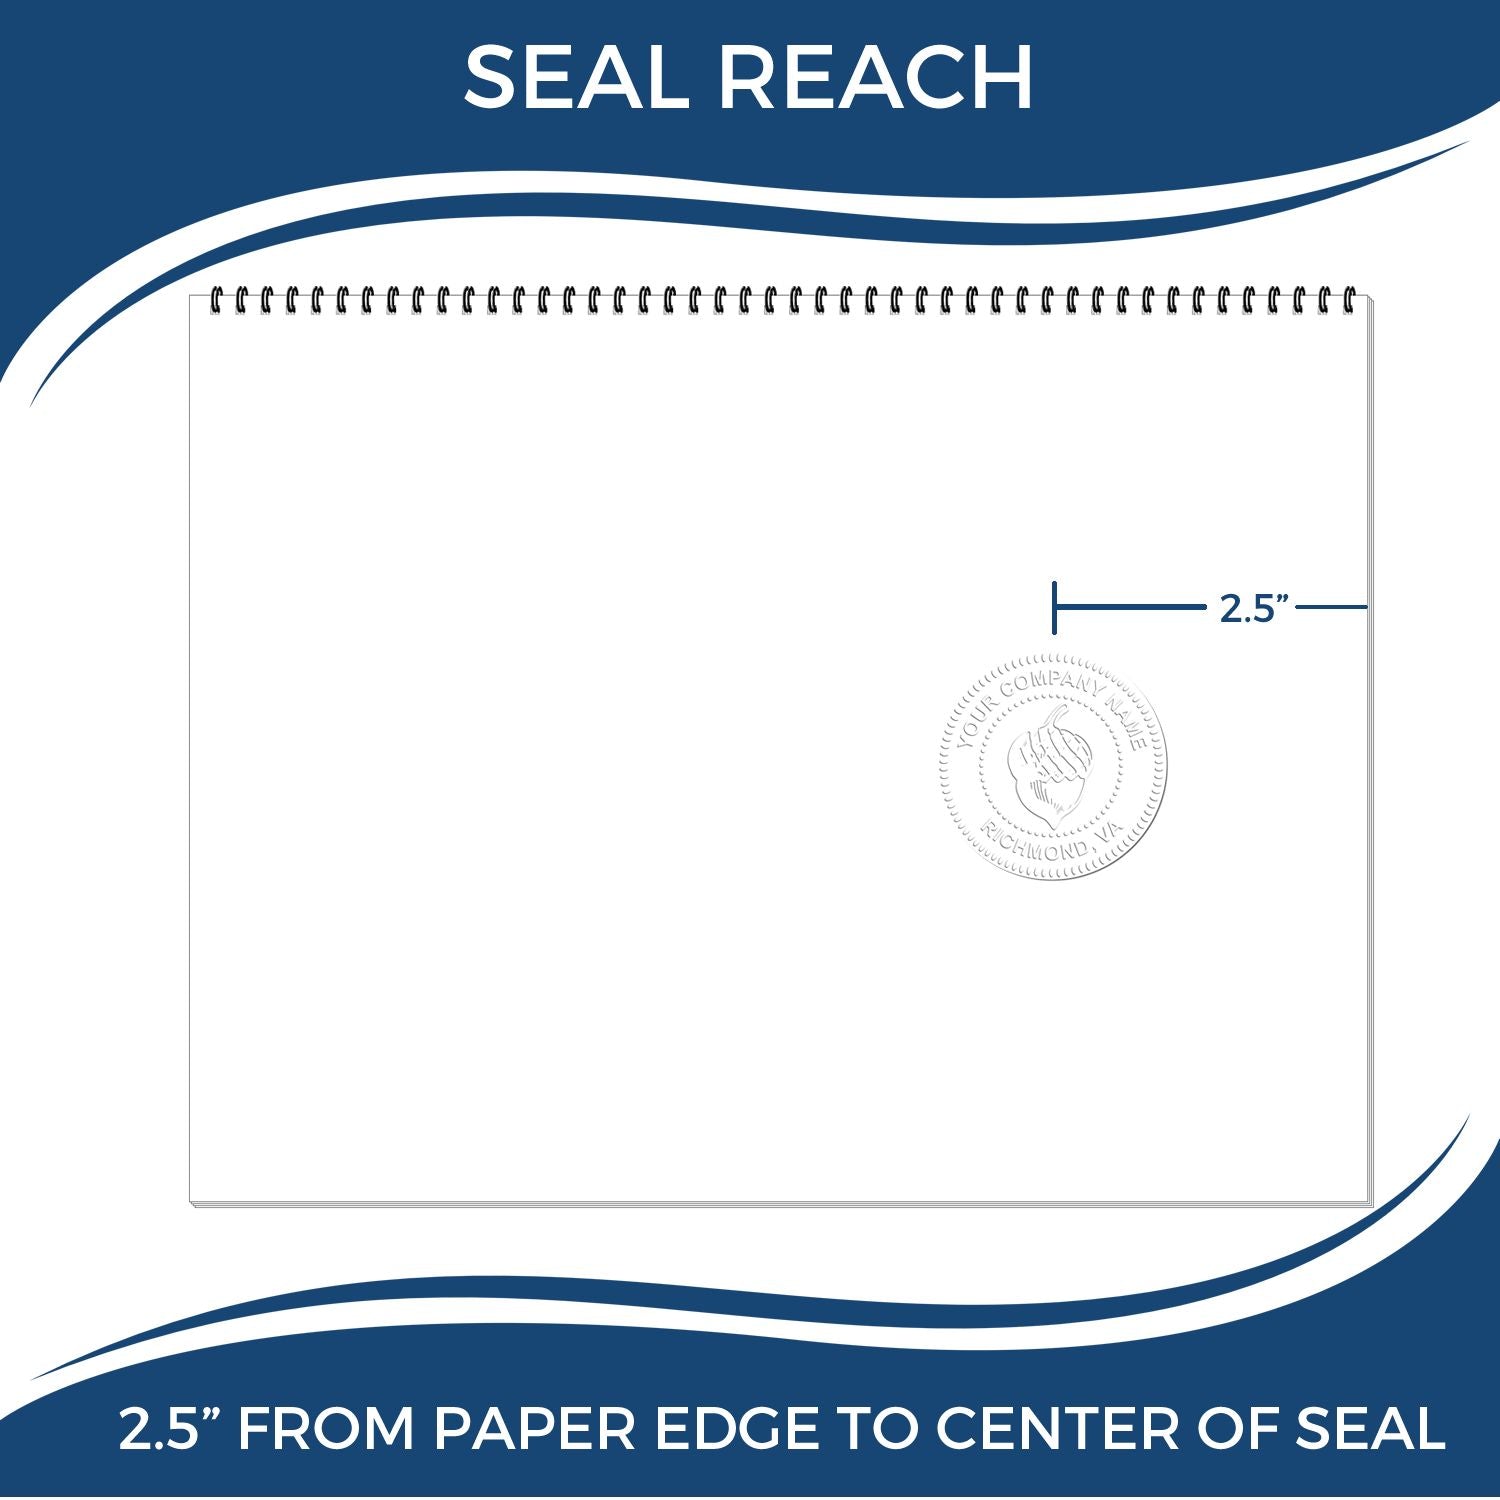 An infographic showing the seal reach which is represented by a ruler and a miniature seal image of the Heavy Duty Cast Iron Maine Engineer Seal Embosser